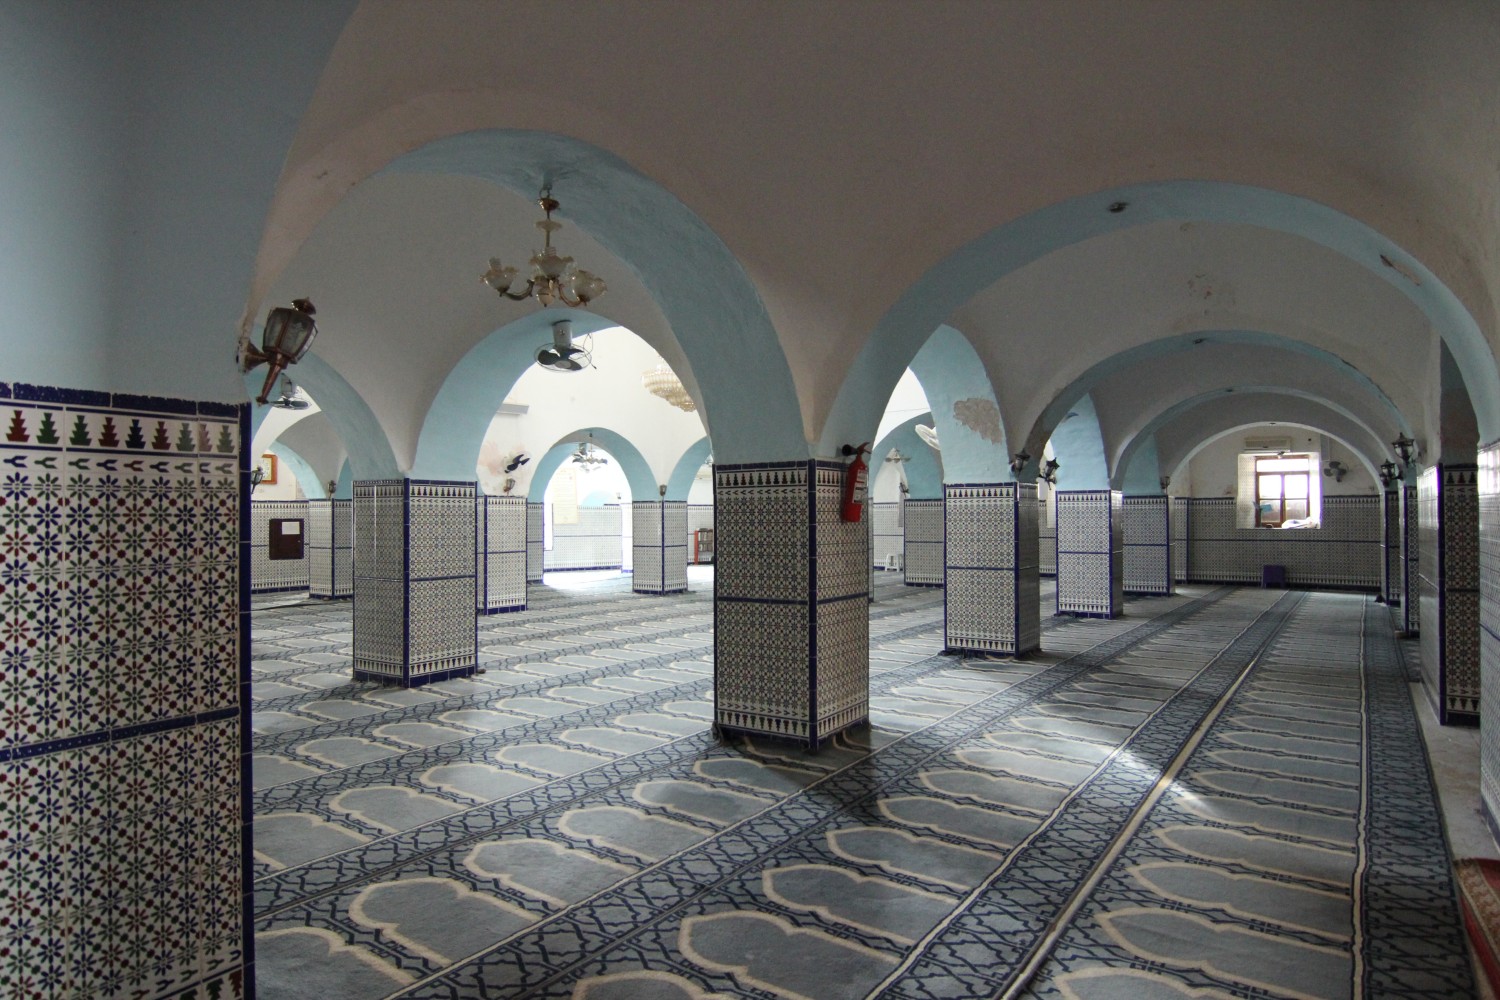 View of the prayer hall